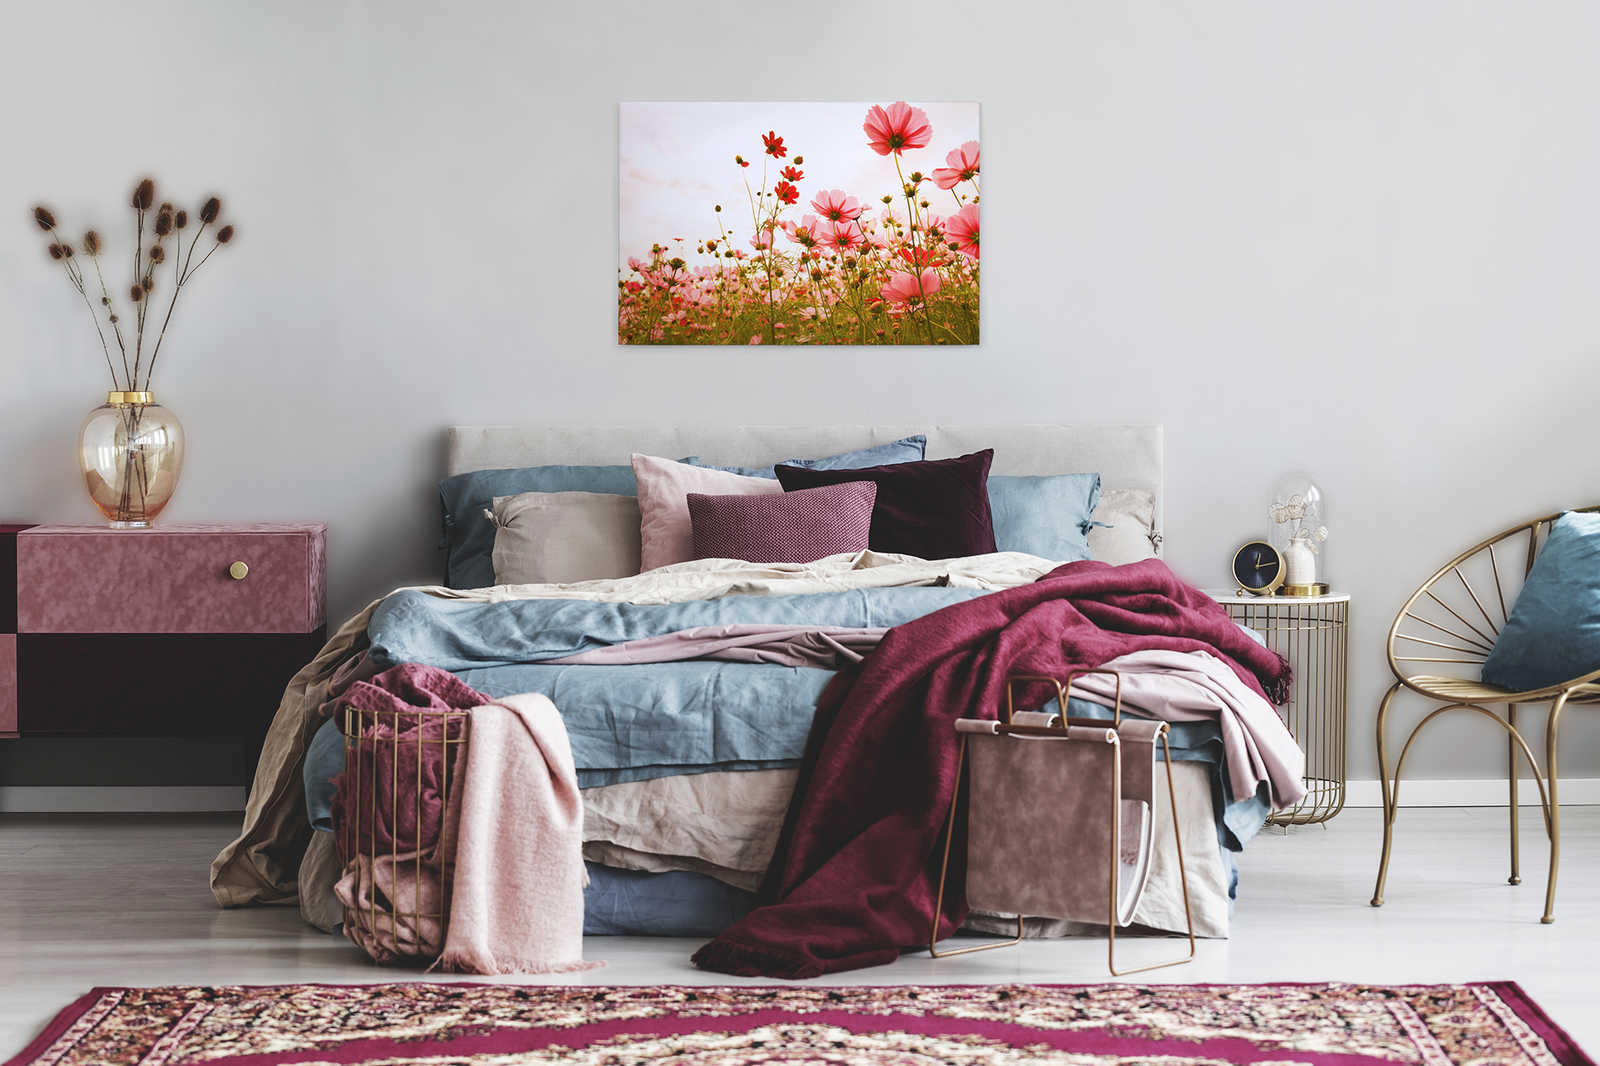             Canvas with flower meadow in spring | pink, green, white - 0.90 m x 0.60 m
        